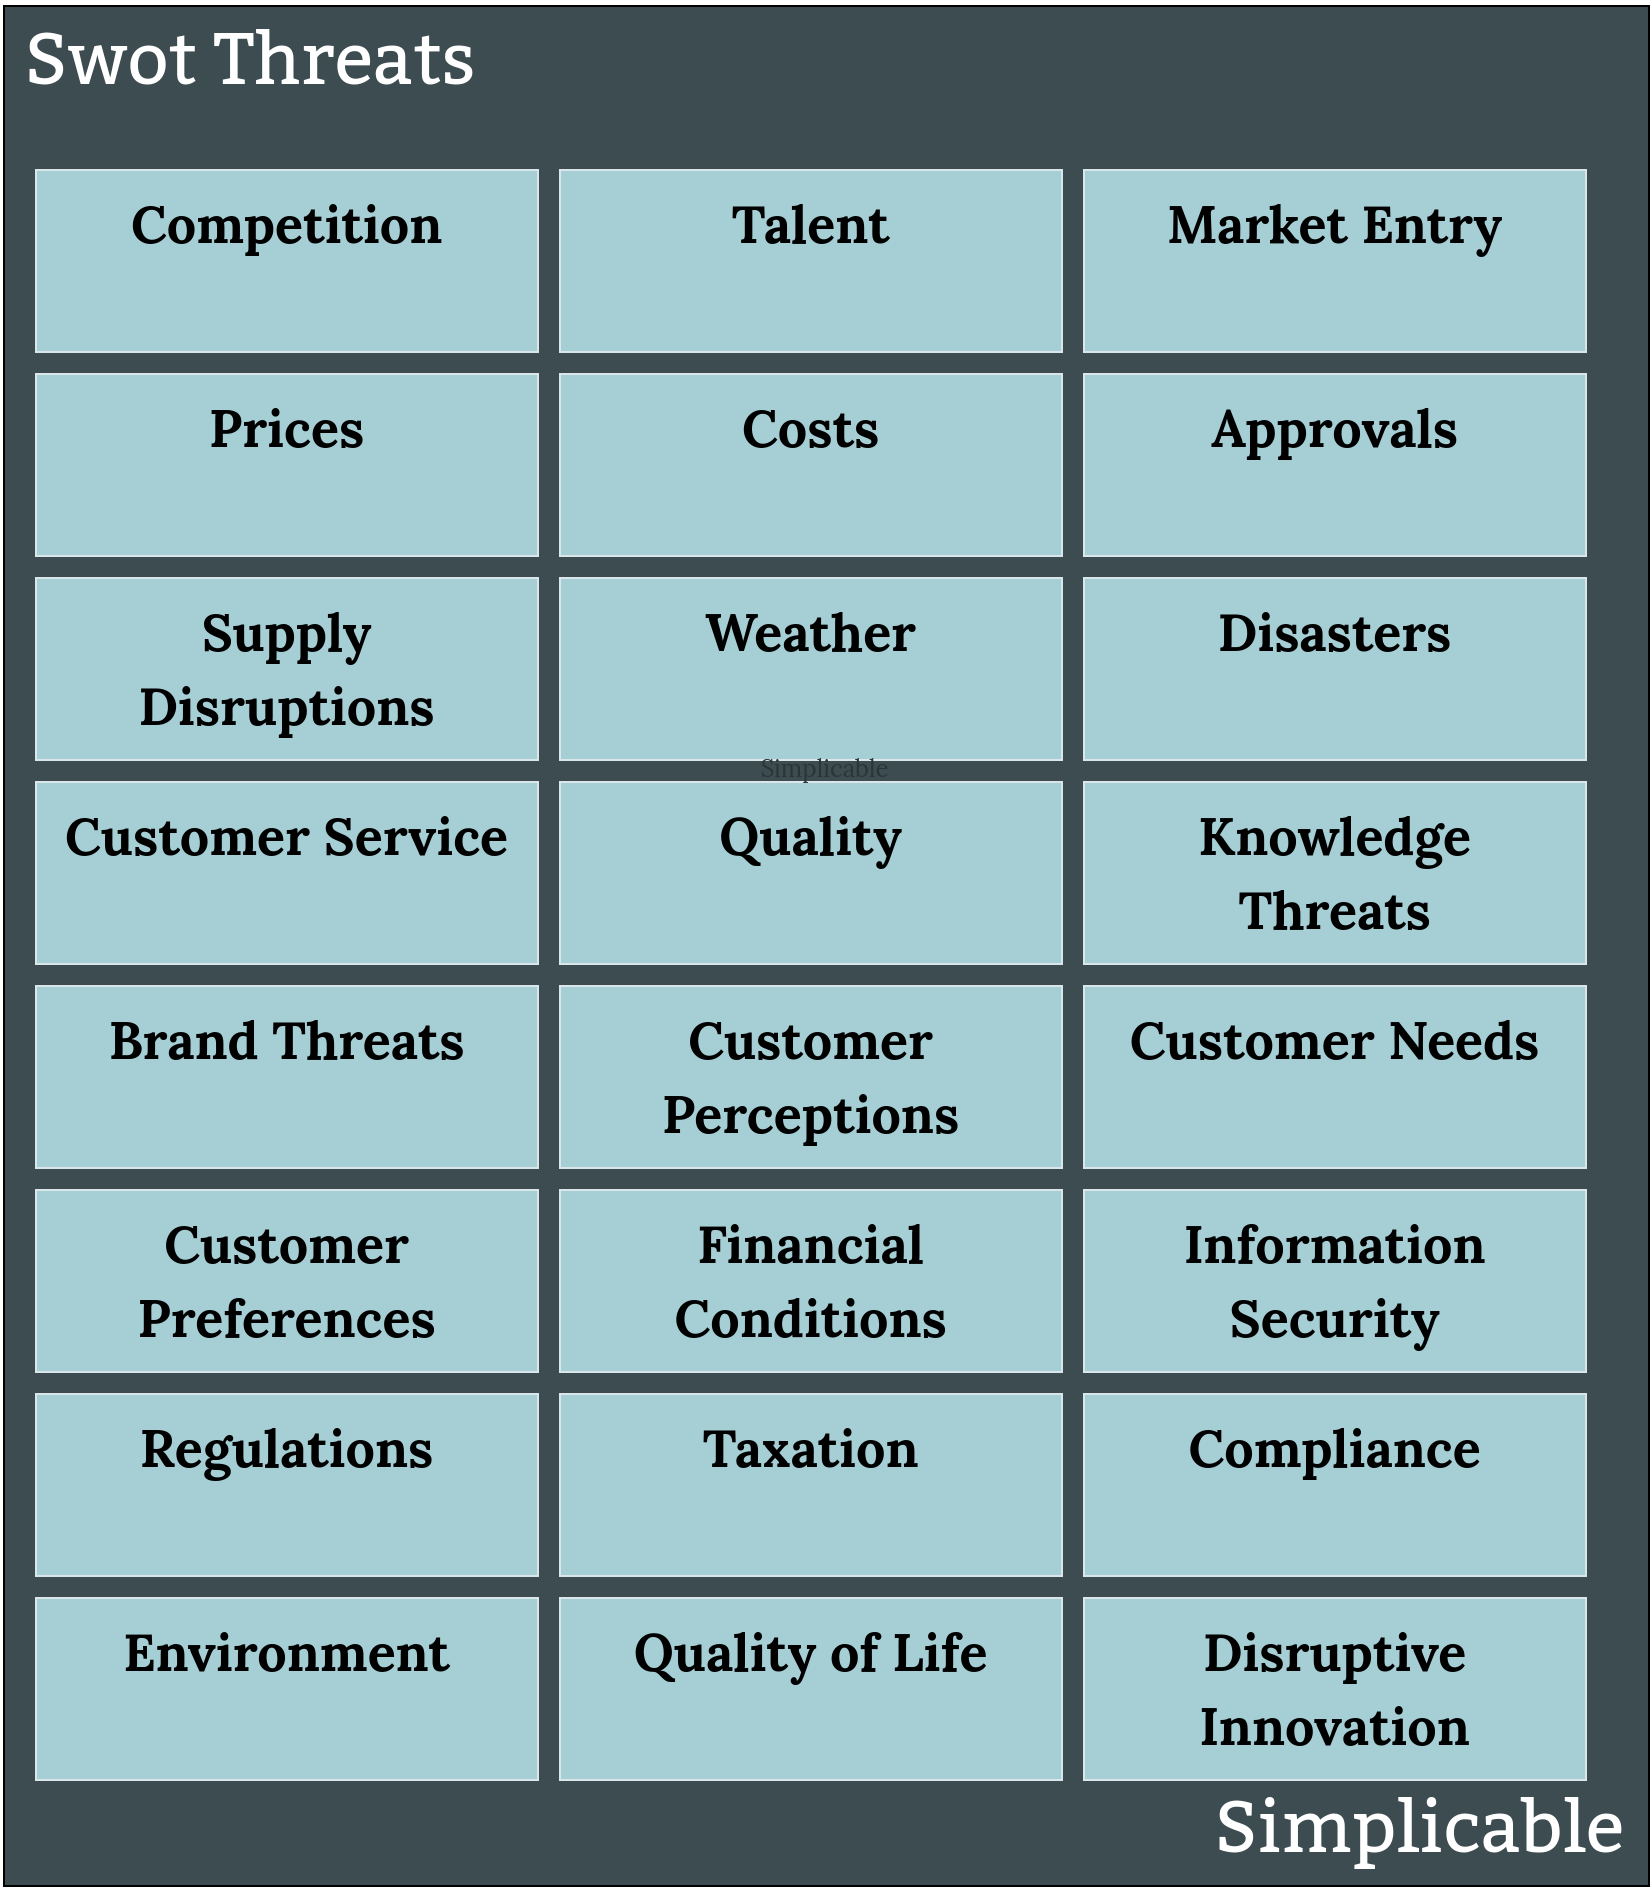 types of swot threats simplicable